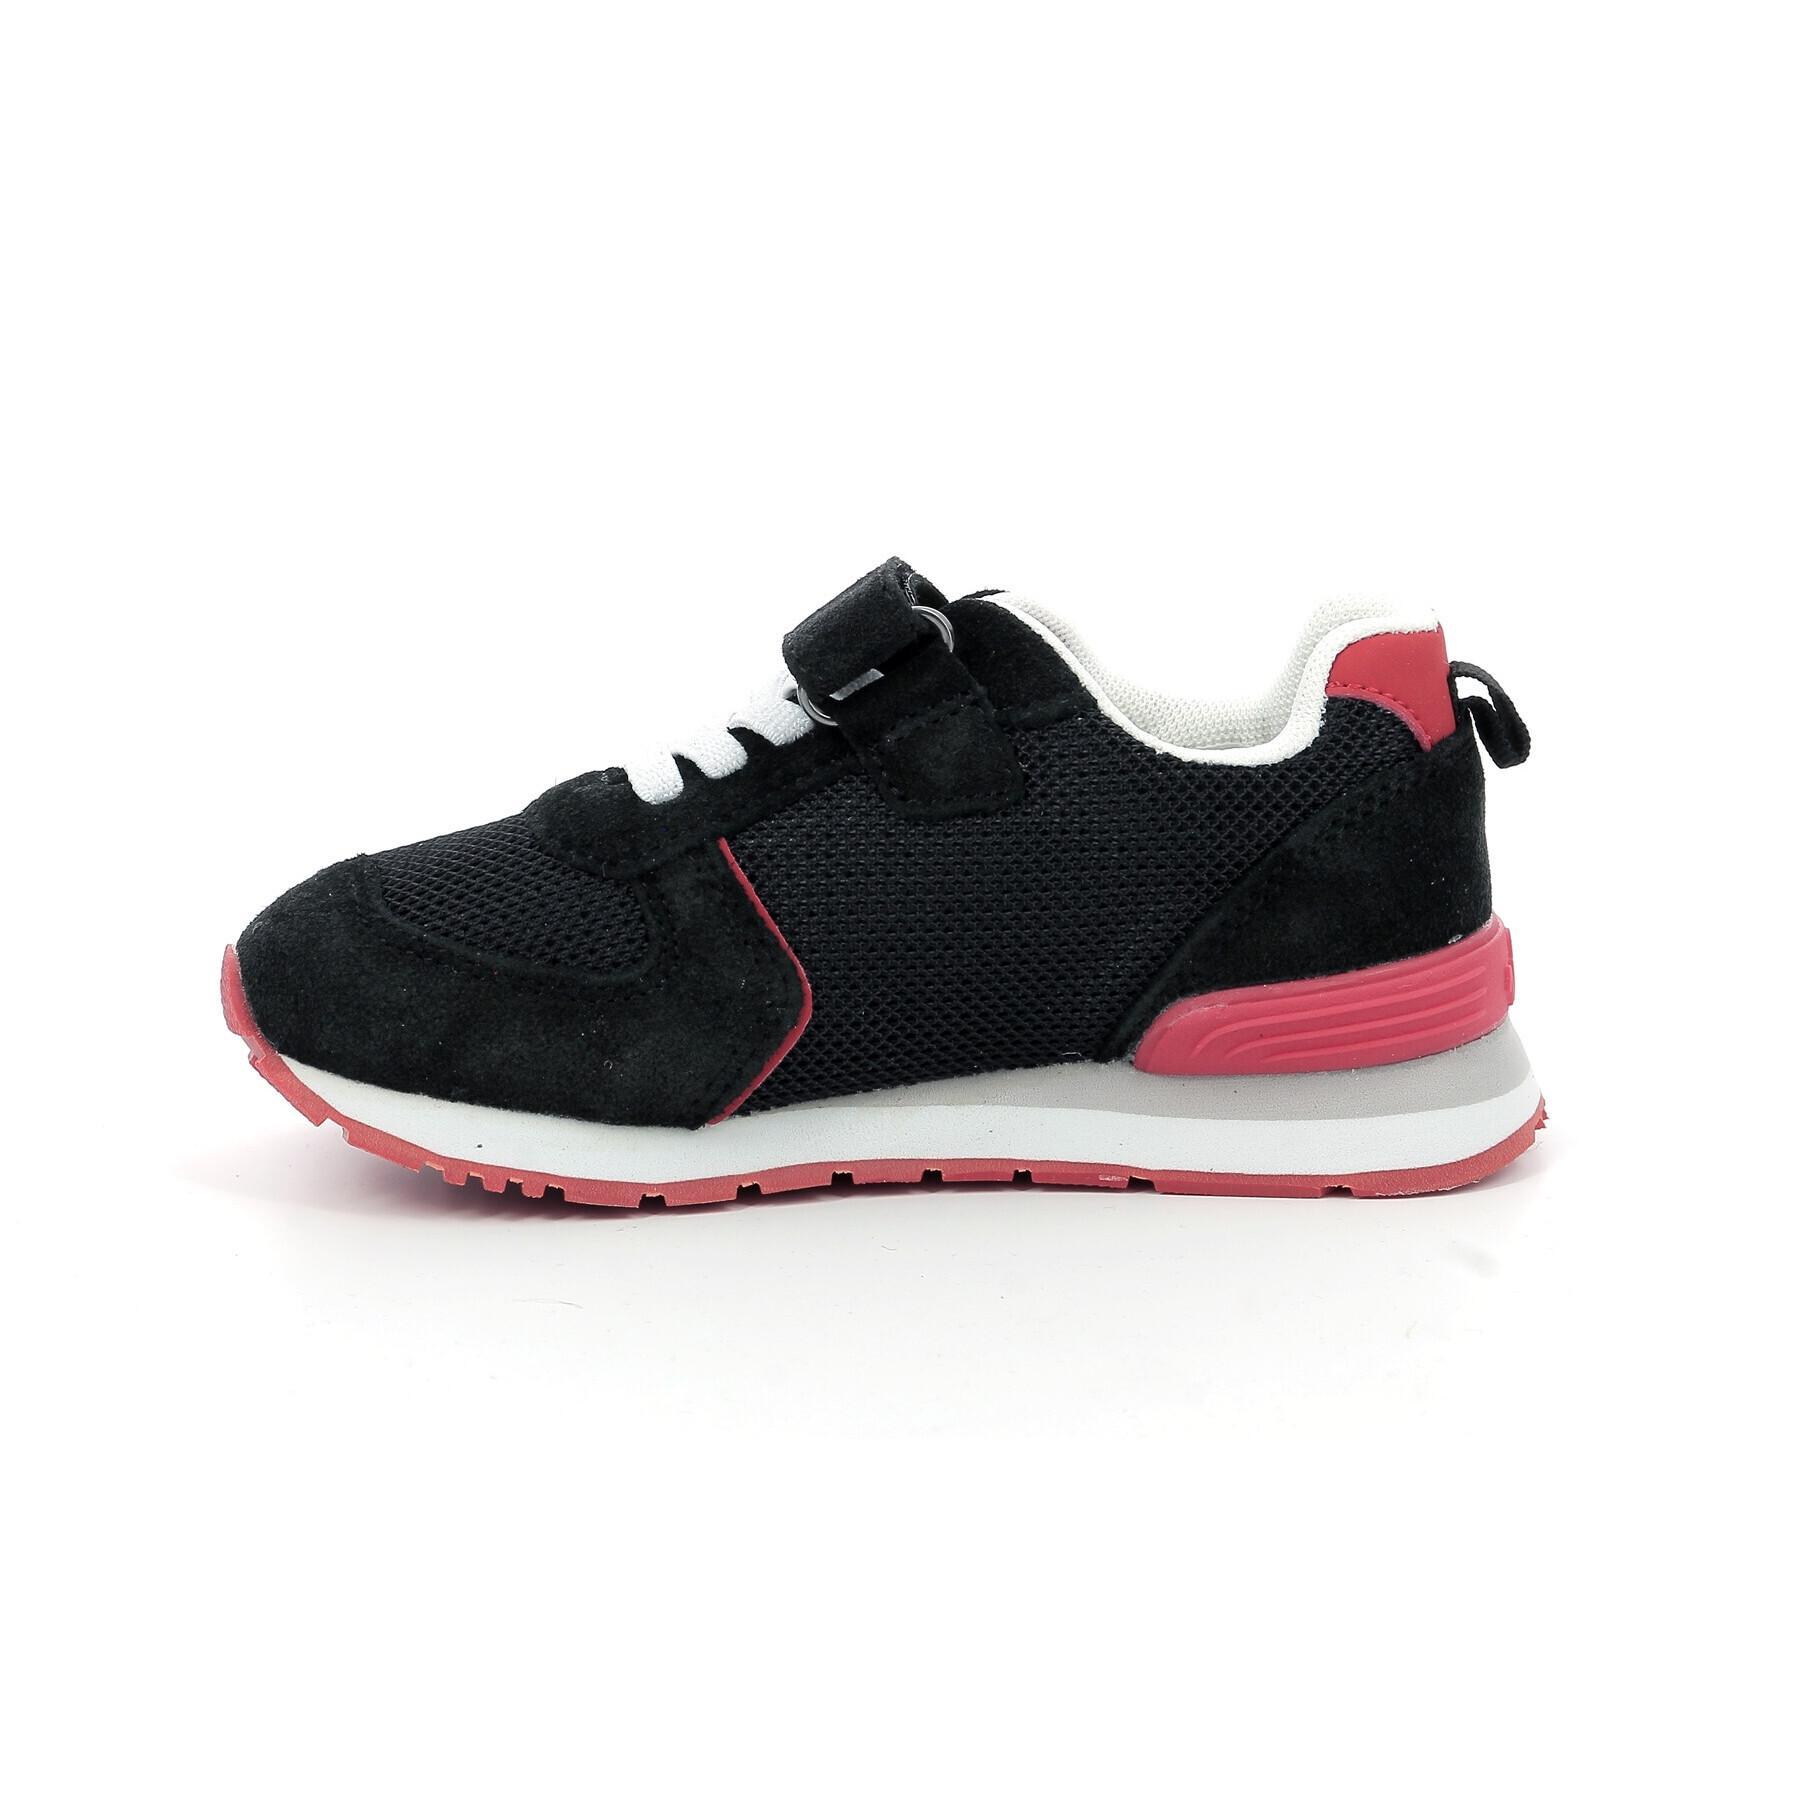 Baby sneakers MOD 8 Snooklace